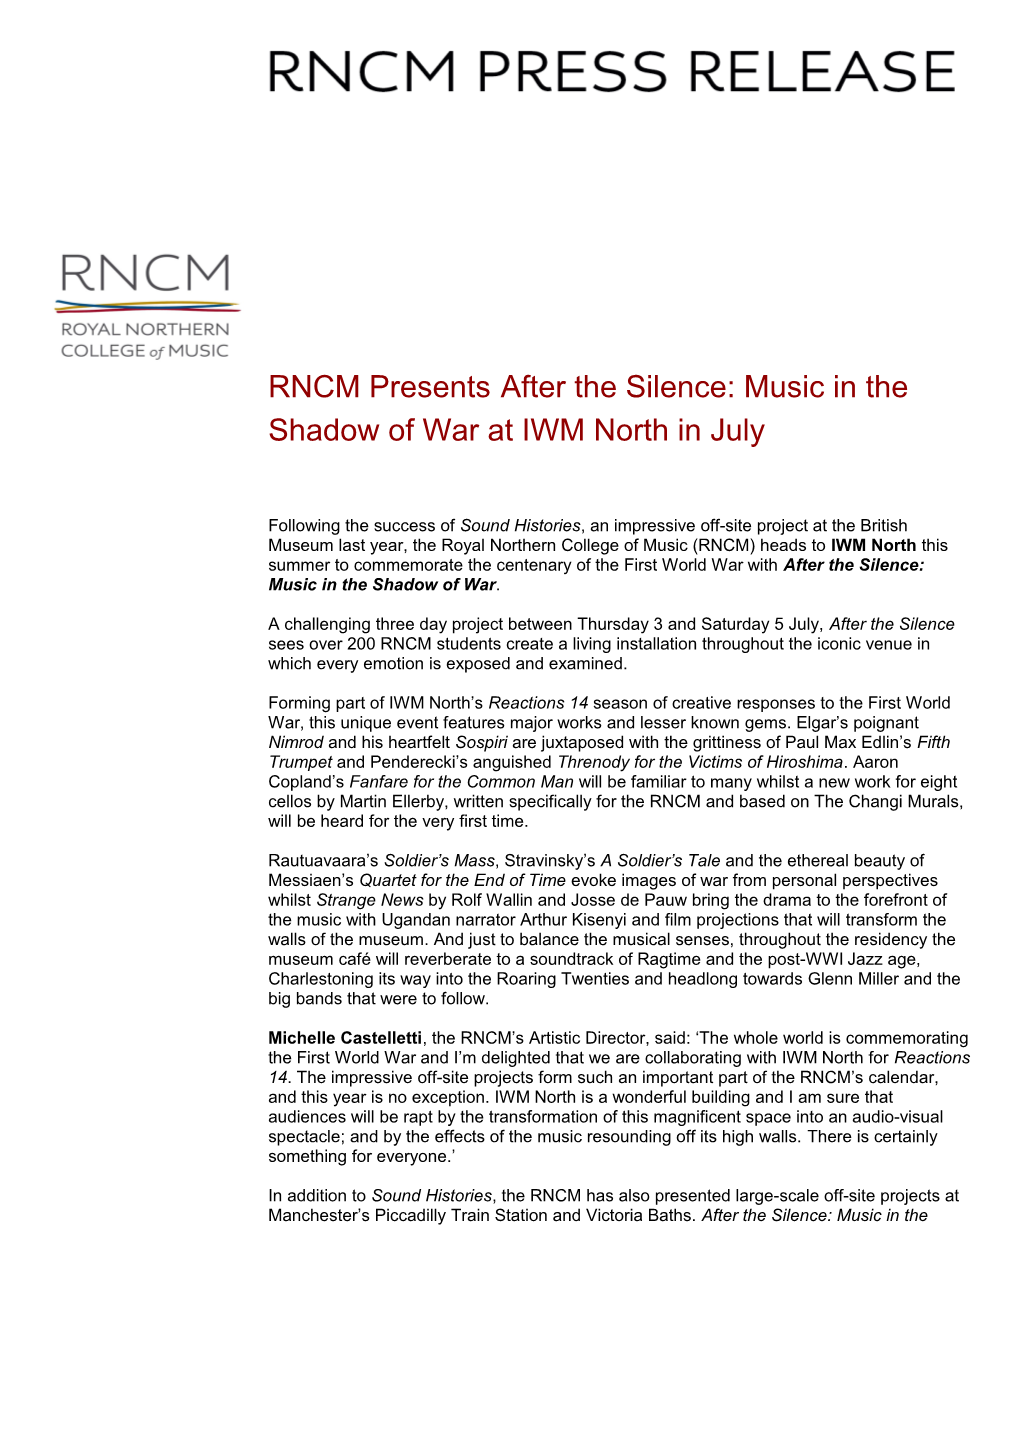 RNCM Presentsafter the Silence: Music in the Shadow of War at IWM North in July